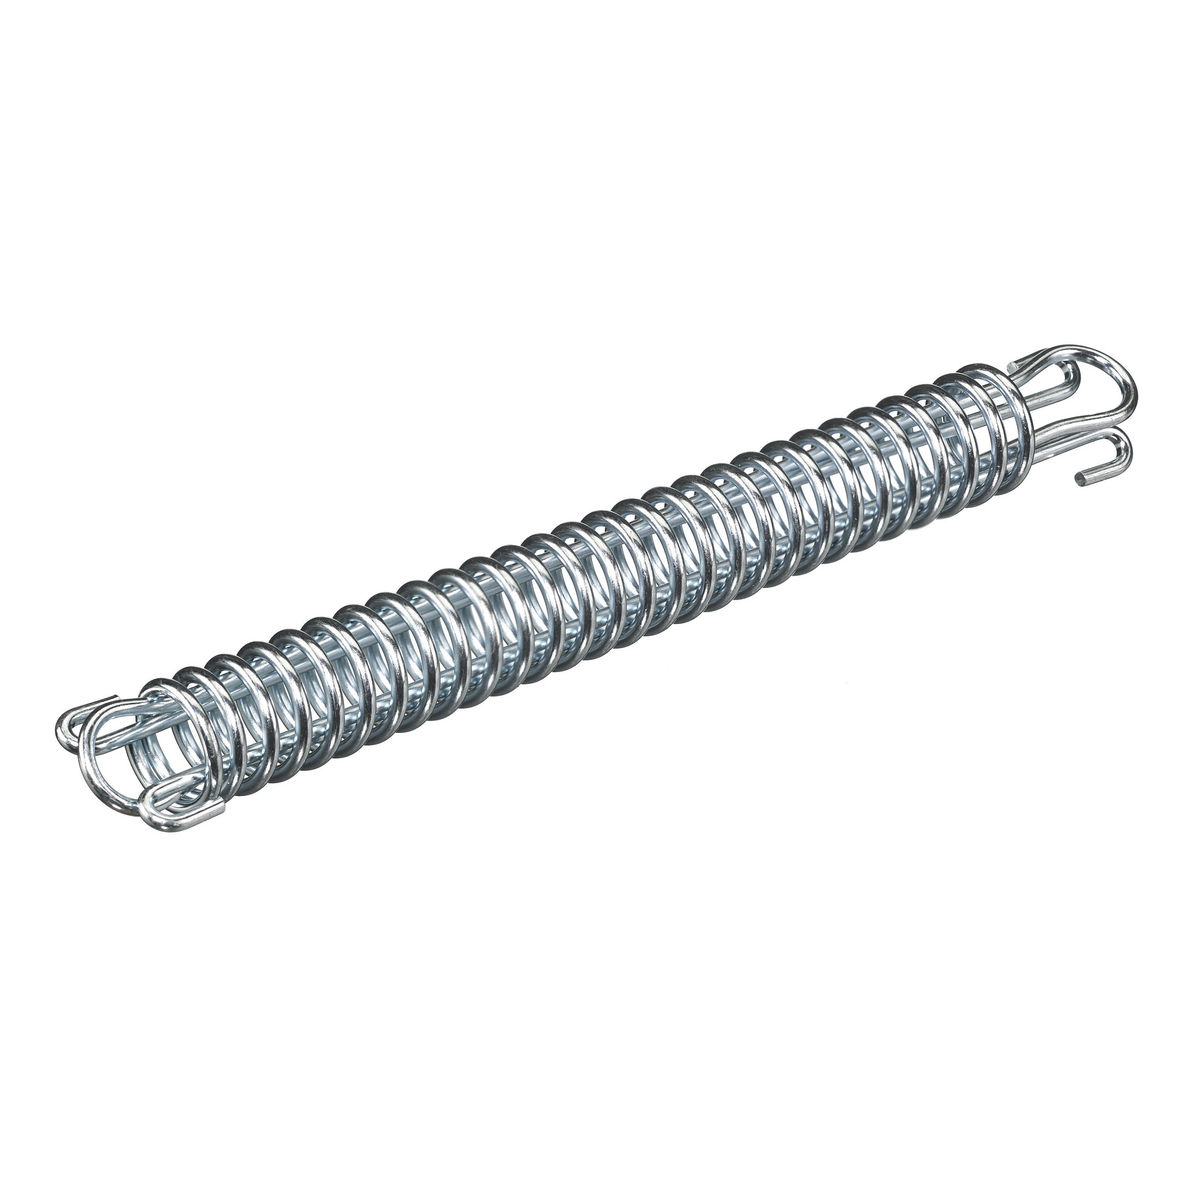 Bus Drop Support Grips, Safety Spring, Galvanized Steel, 80 LB Rated, 20302002